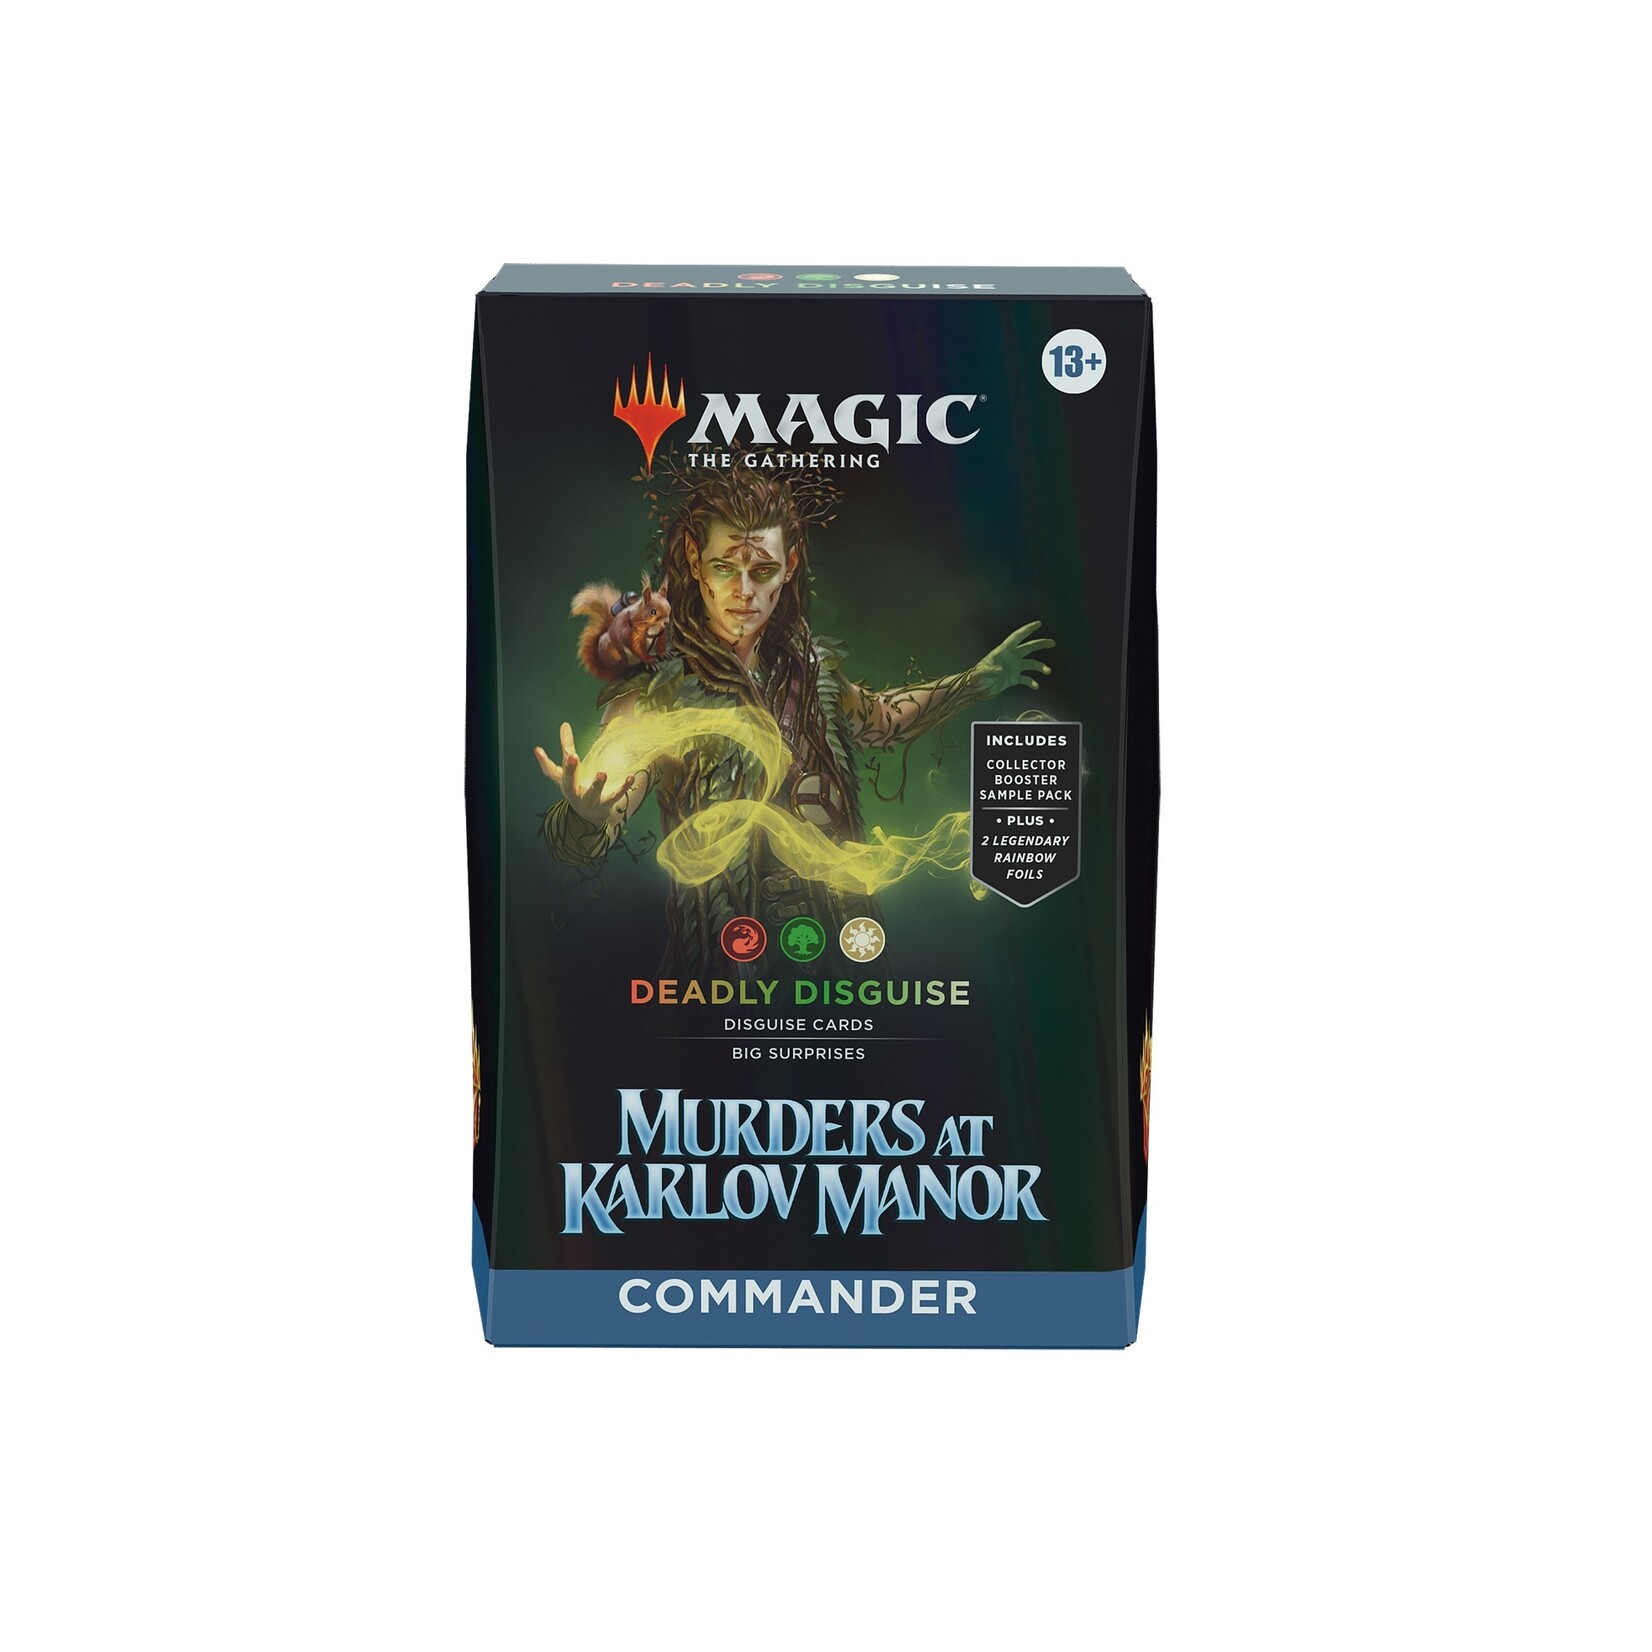 Wizard of the coast Magic the Gathering -  Murder at Karlov Manor - Commander Deck - Deadly Disguise